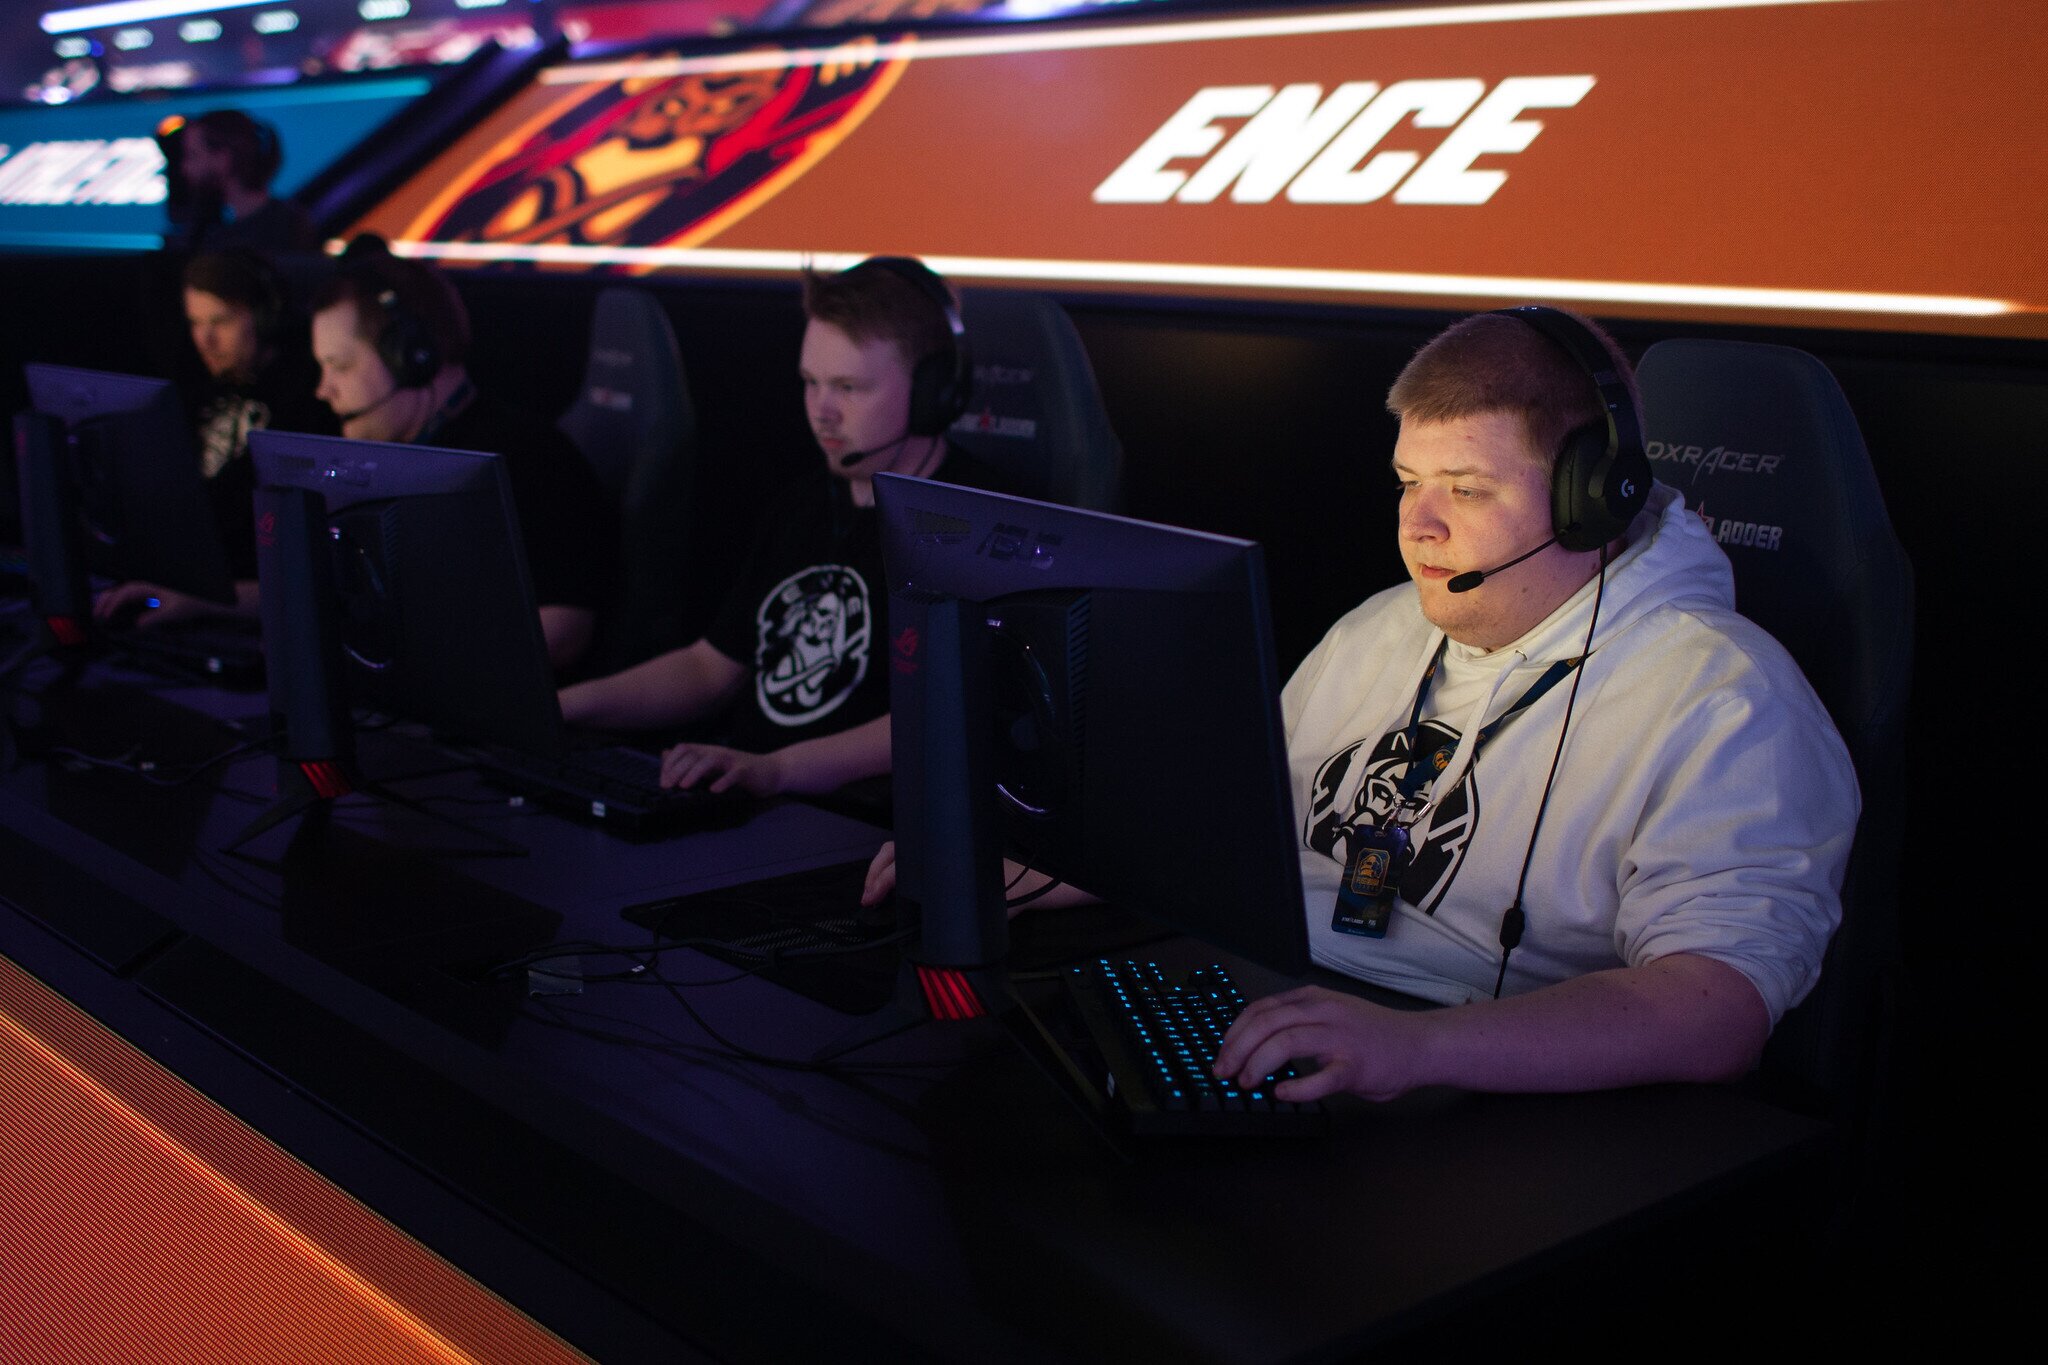 After a standout performance in Phase 1, ENCE looks to continue their dominance at the FACEIT Global Summit.